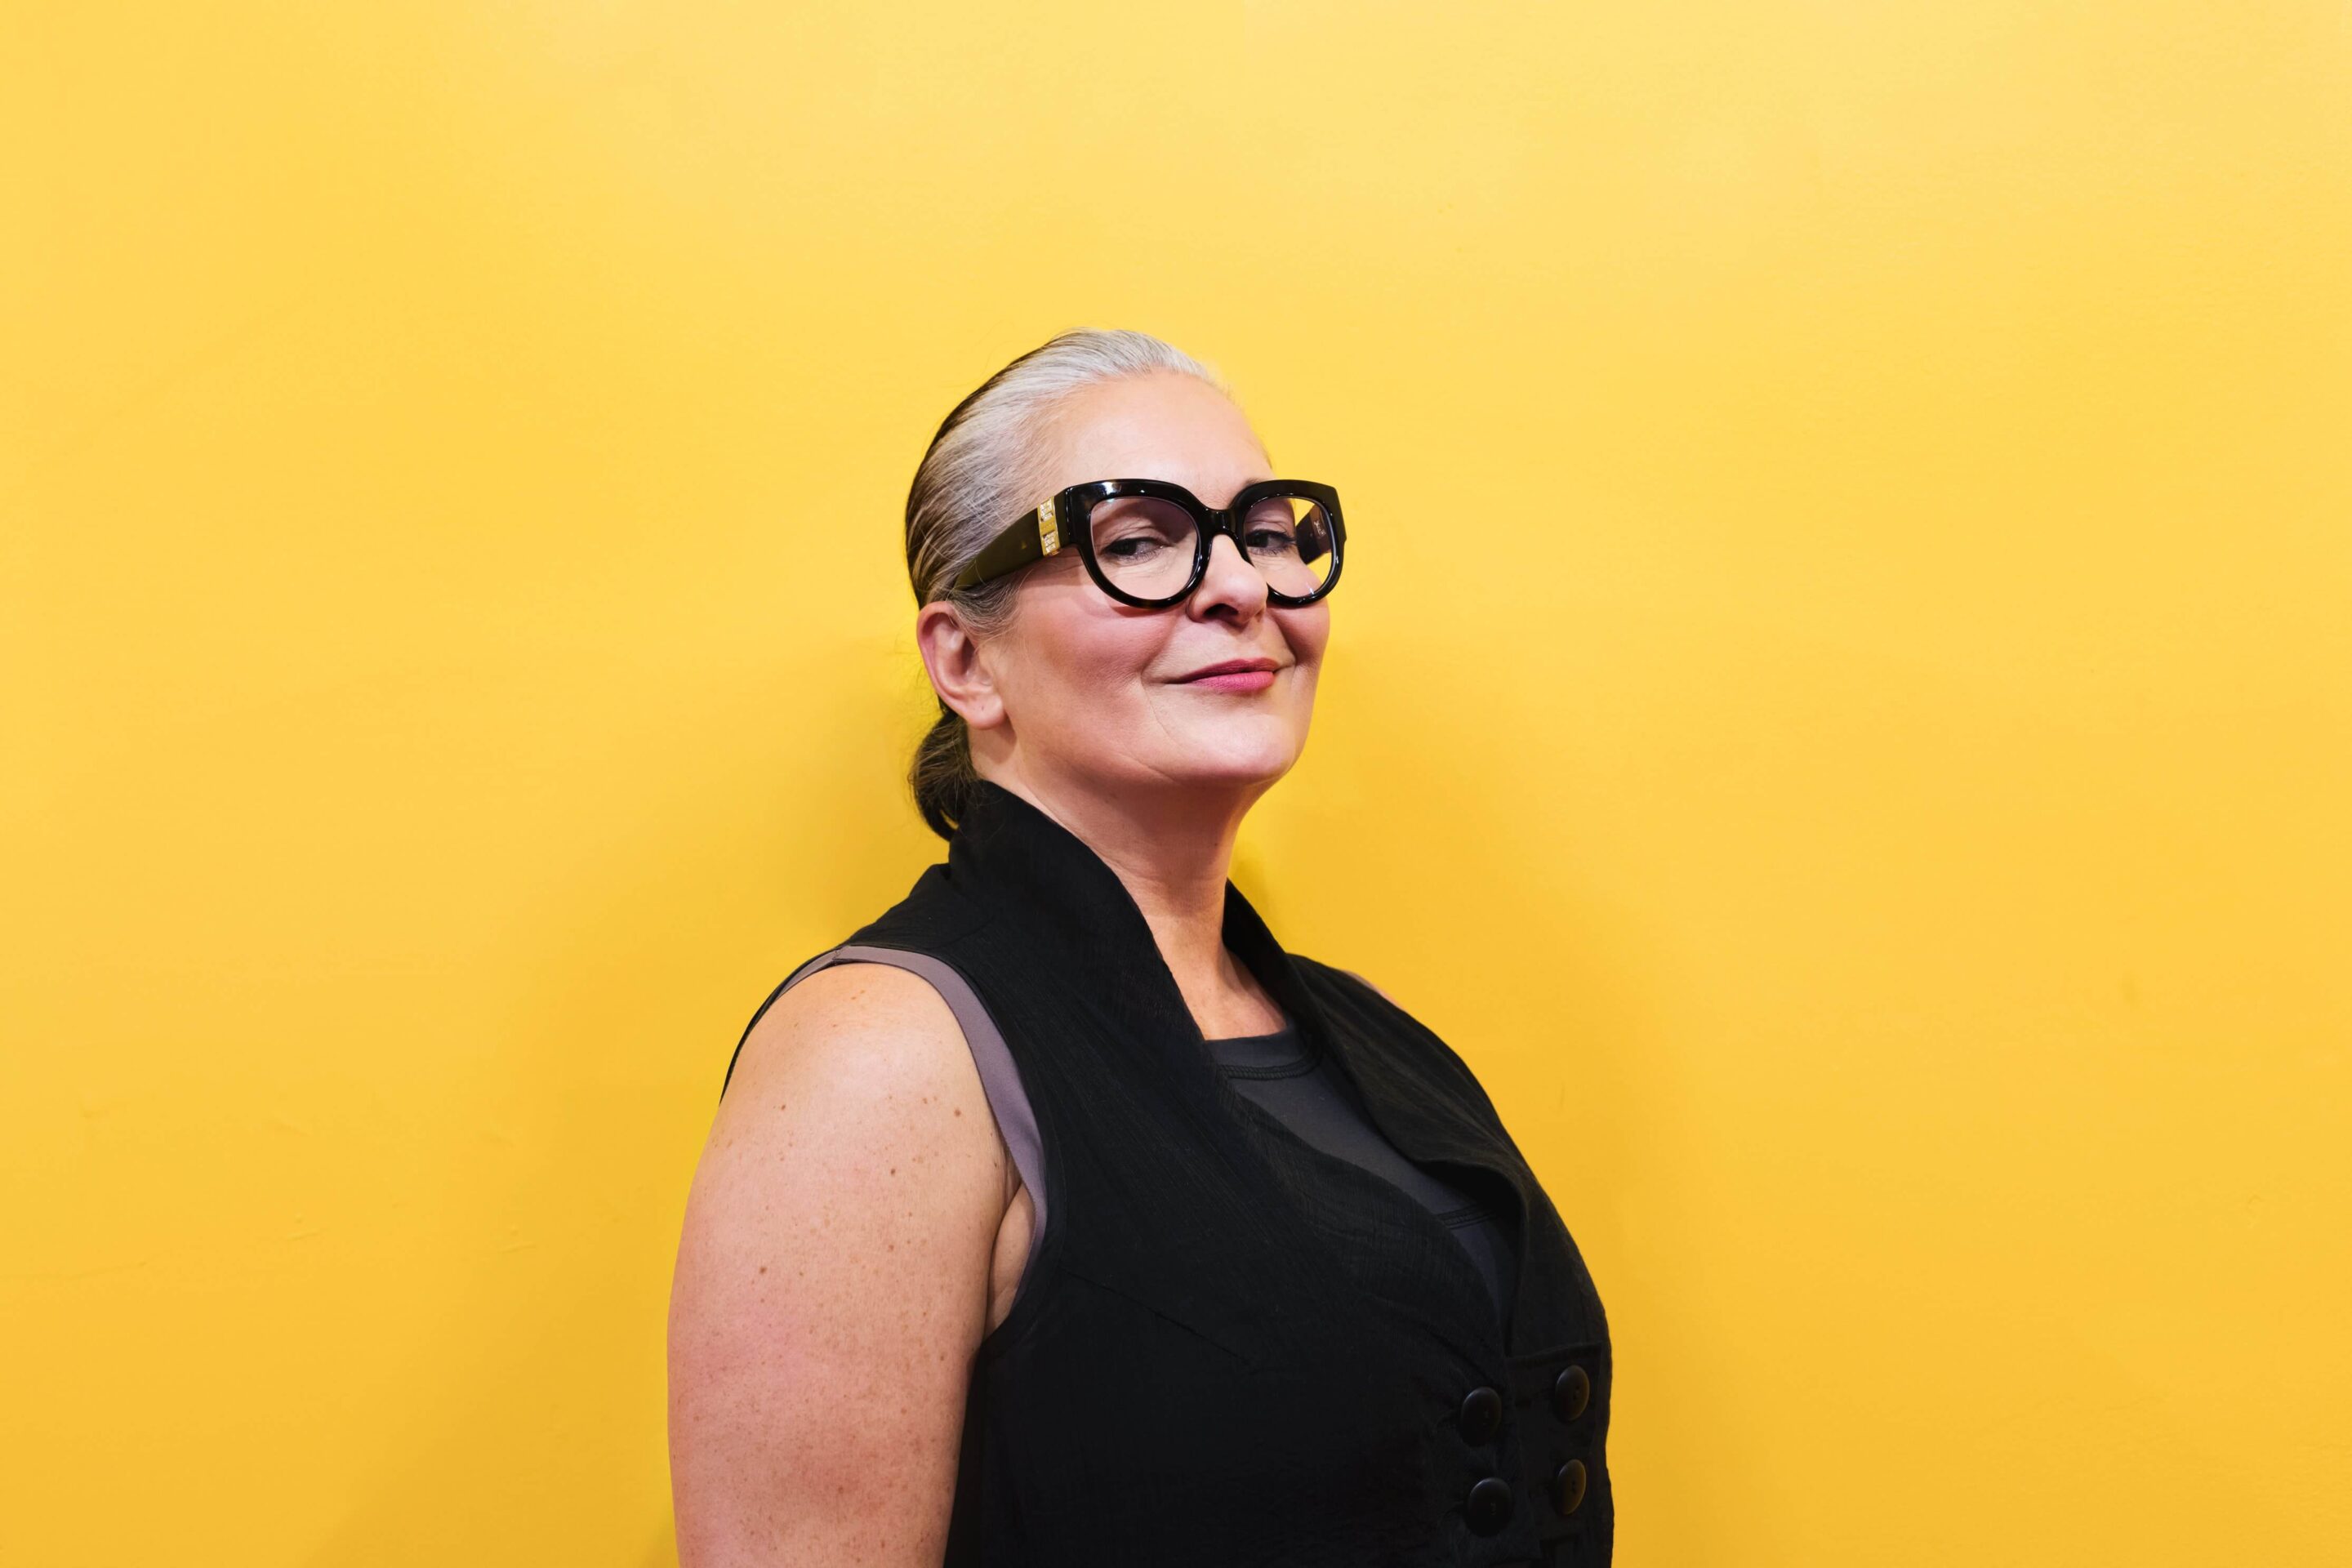 fashionable older woman in glasses stands in front of a yellow background